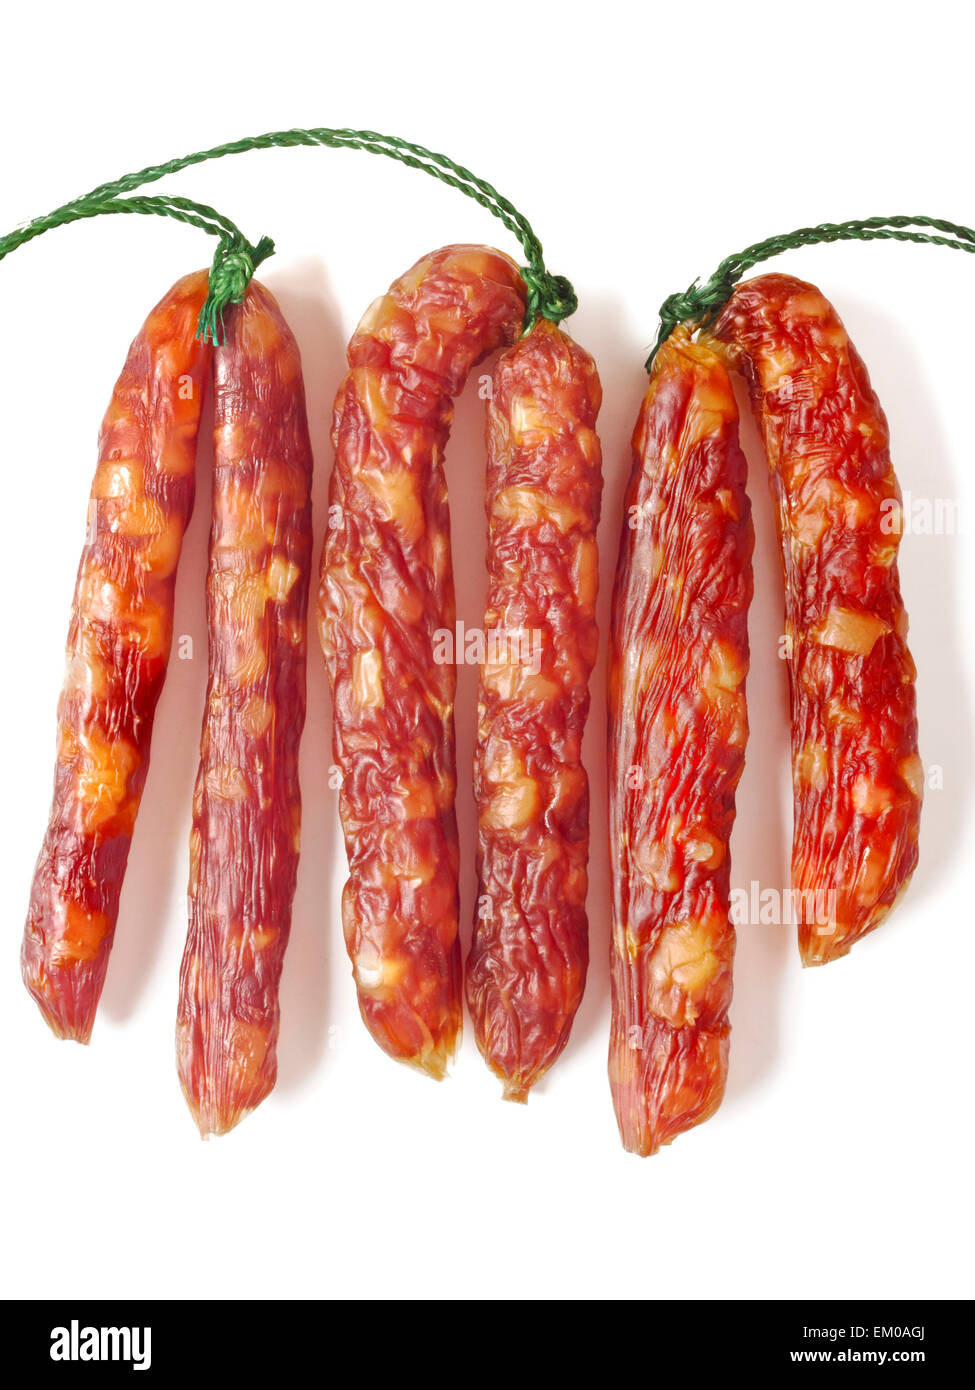 fatty chinese pork sausages Stock Photo